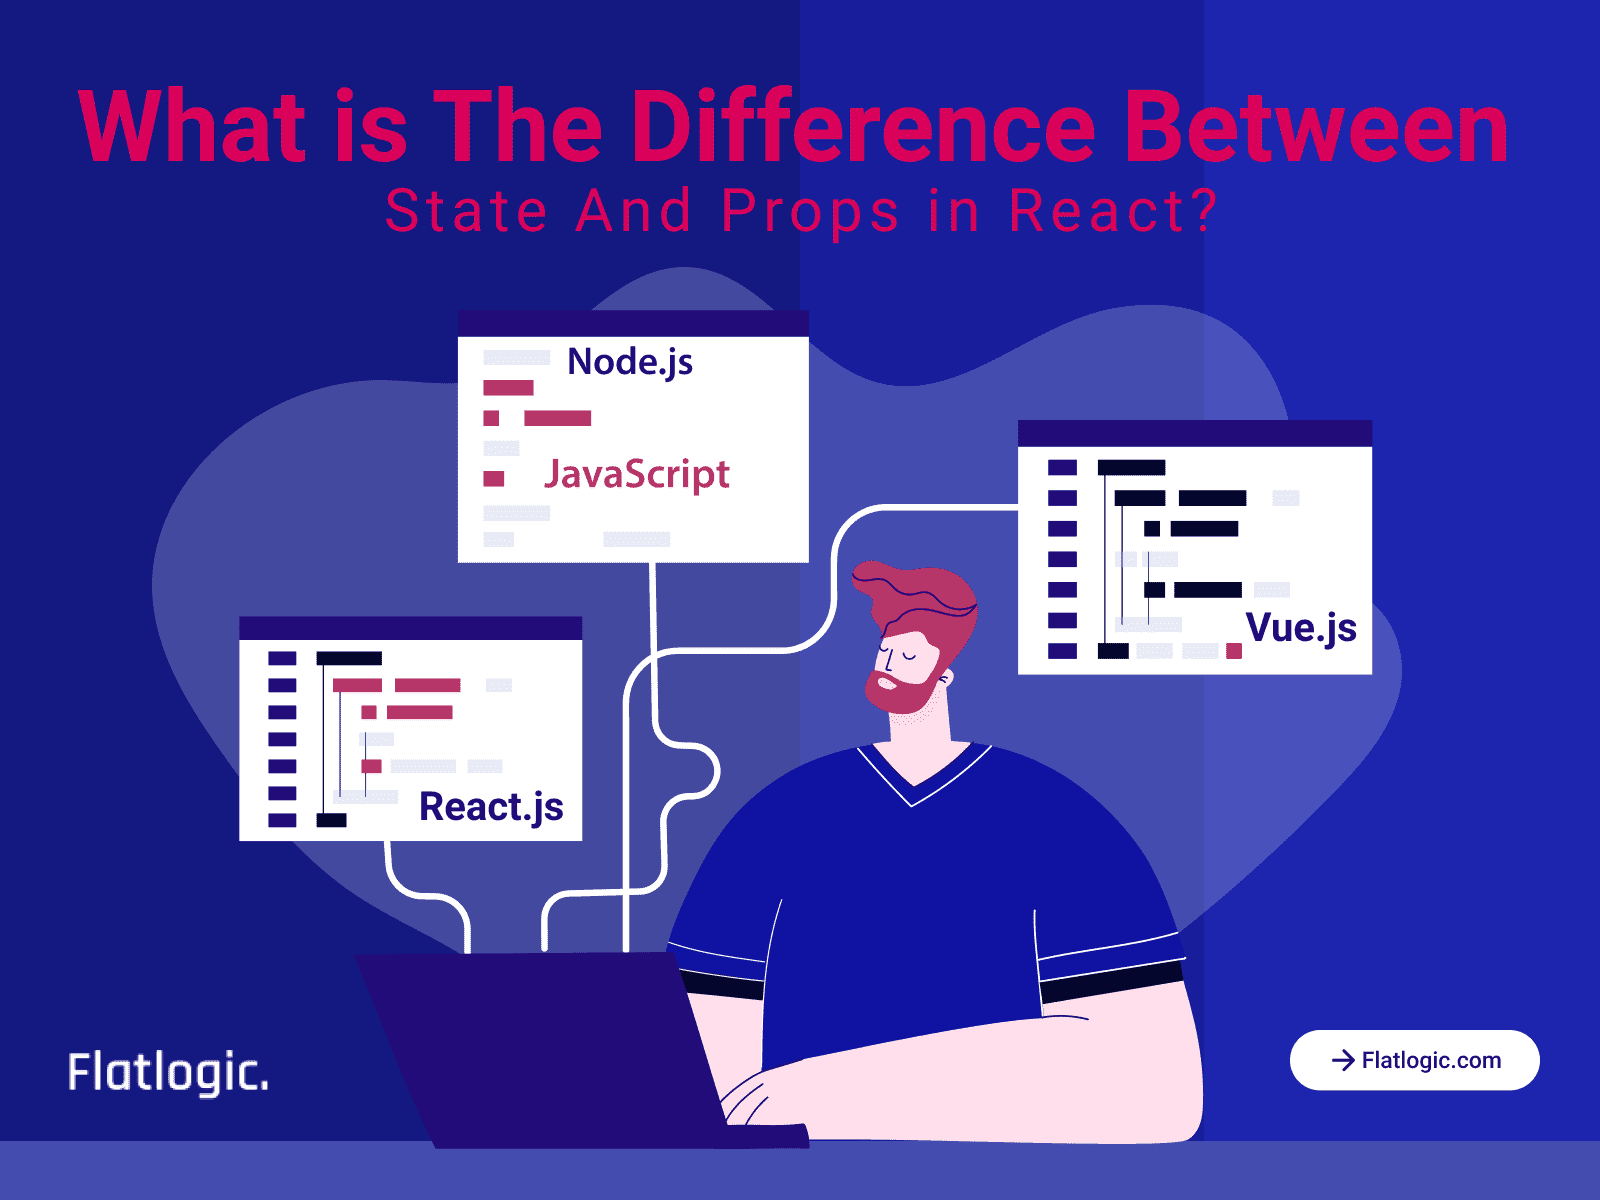 What is The Difference Between State and Props in React?